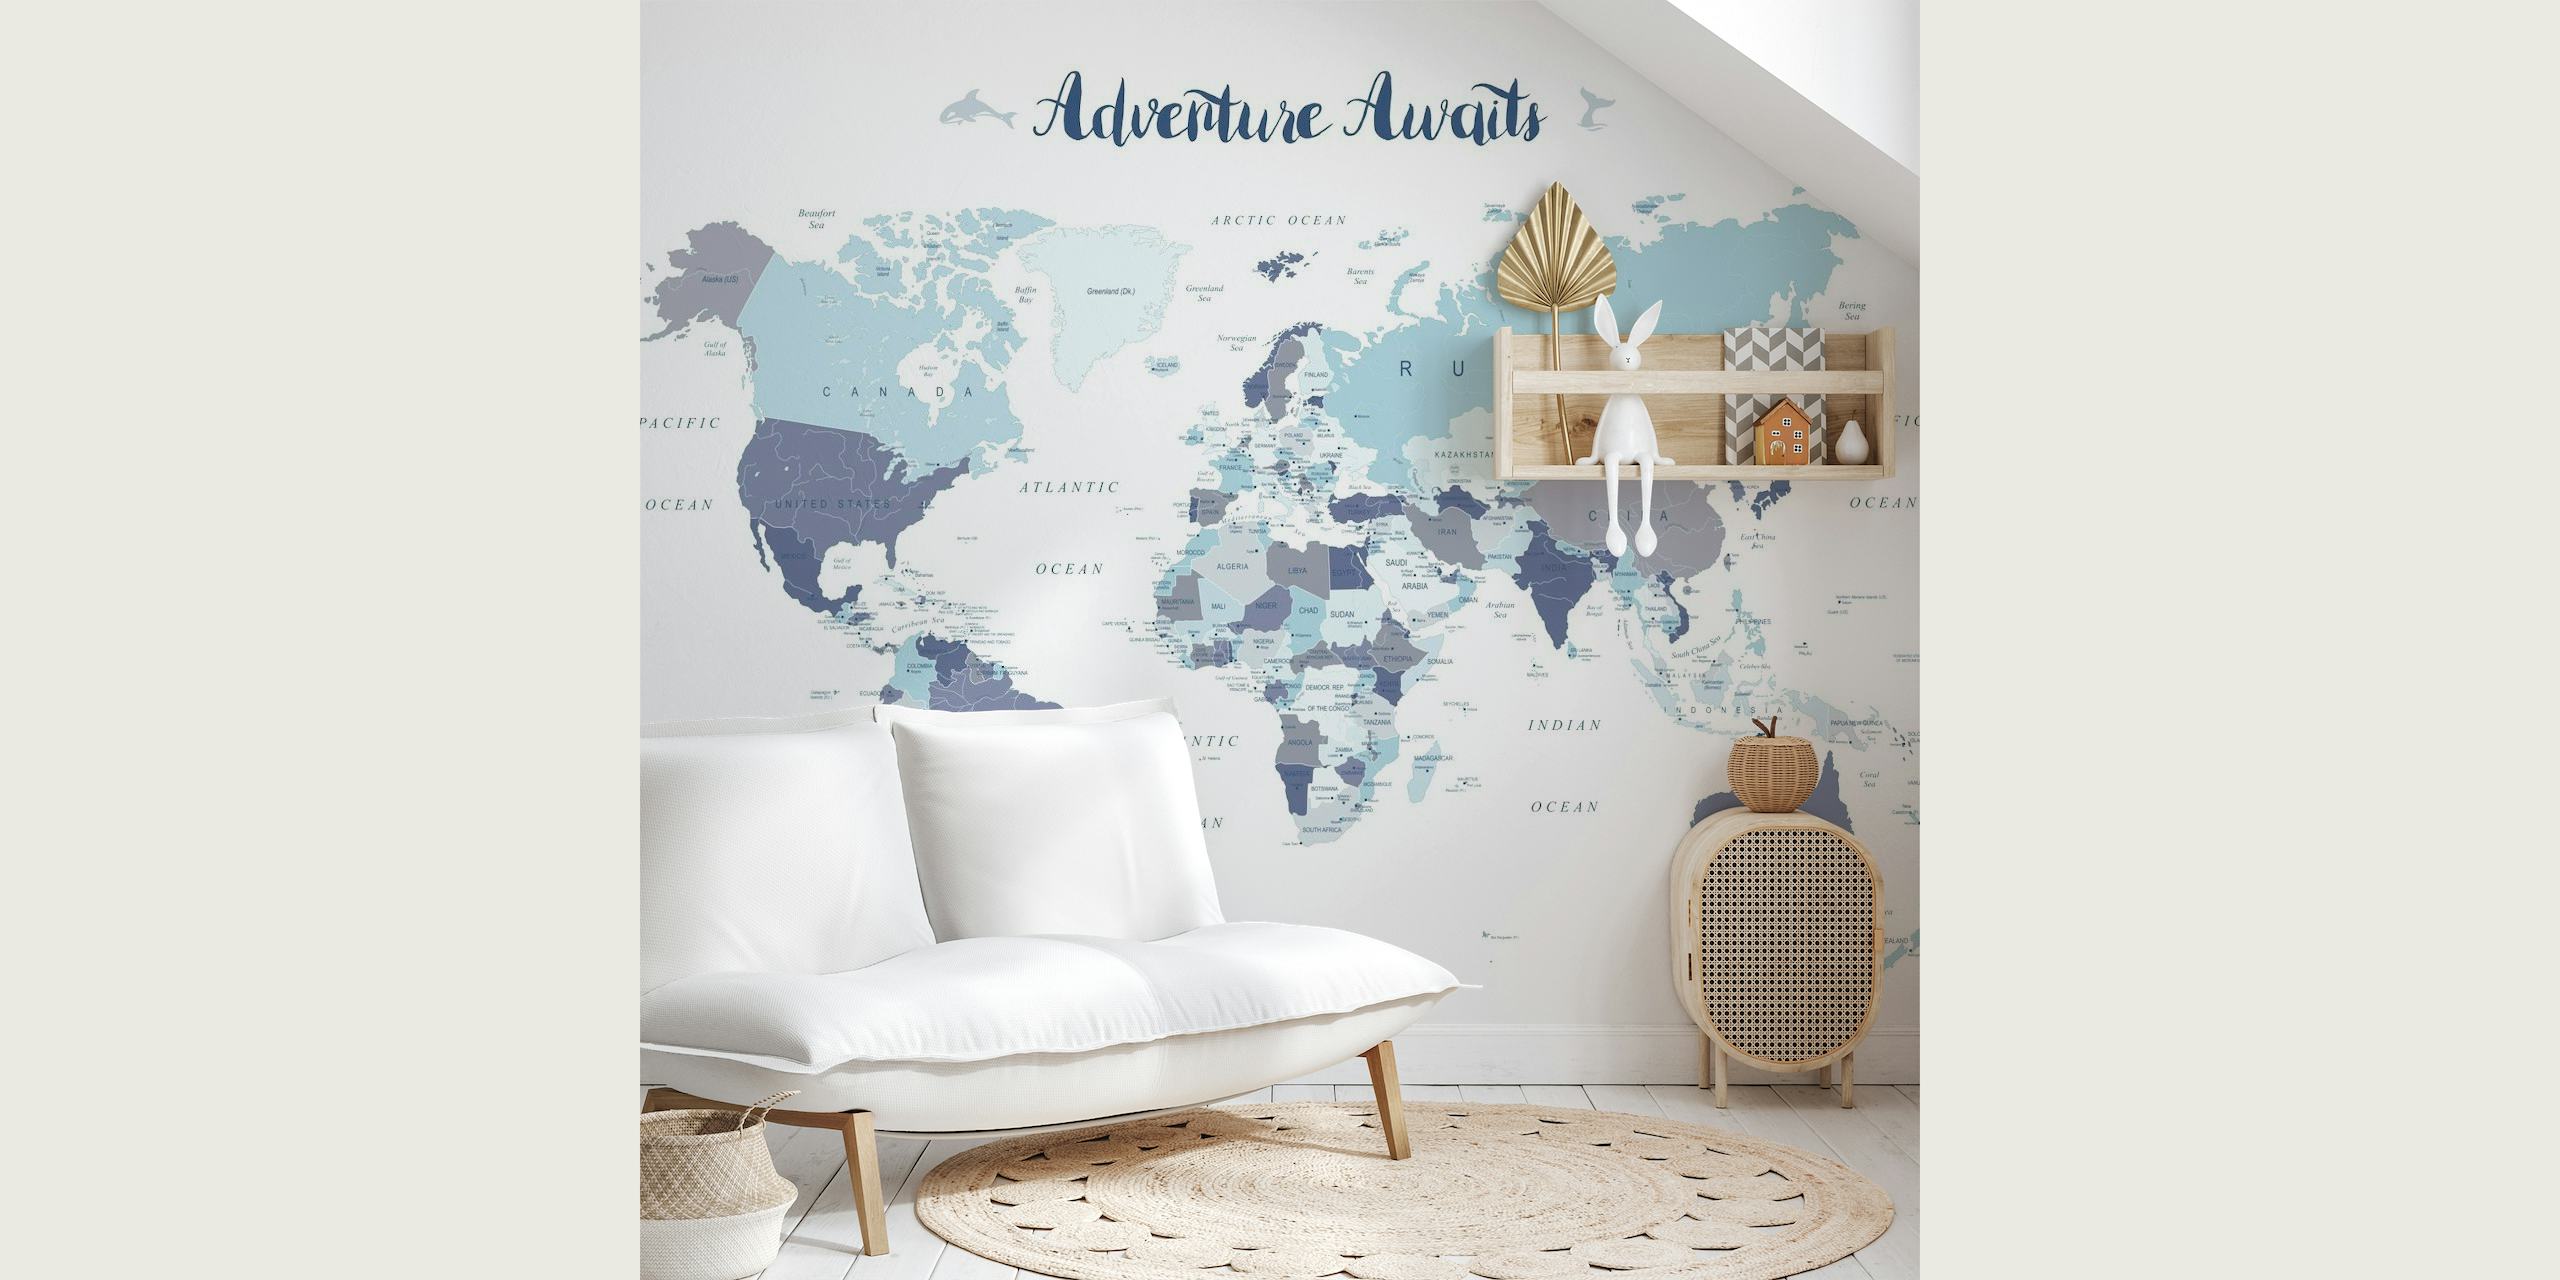 Stylish 'Adventure Awaits World Map' wall mural with soft color palette and clear cartographic details